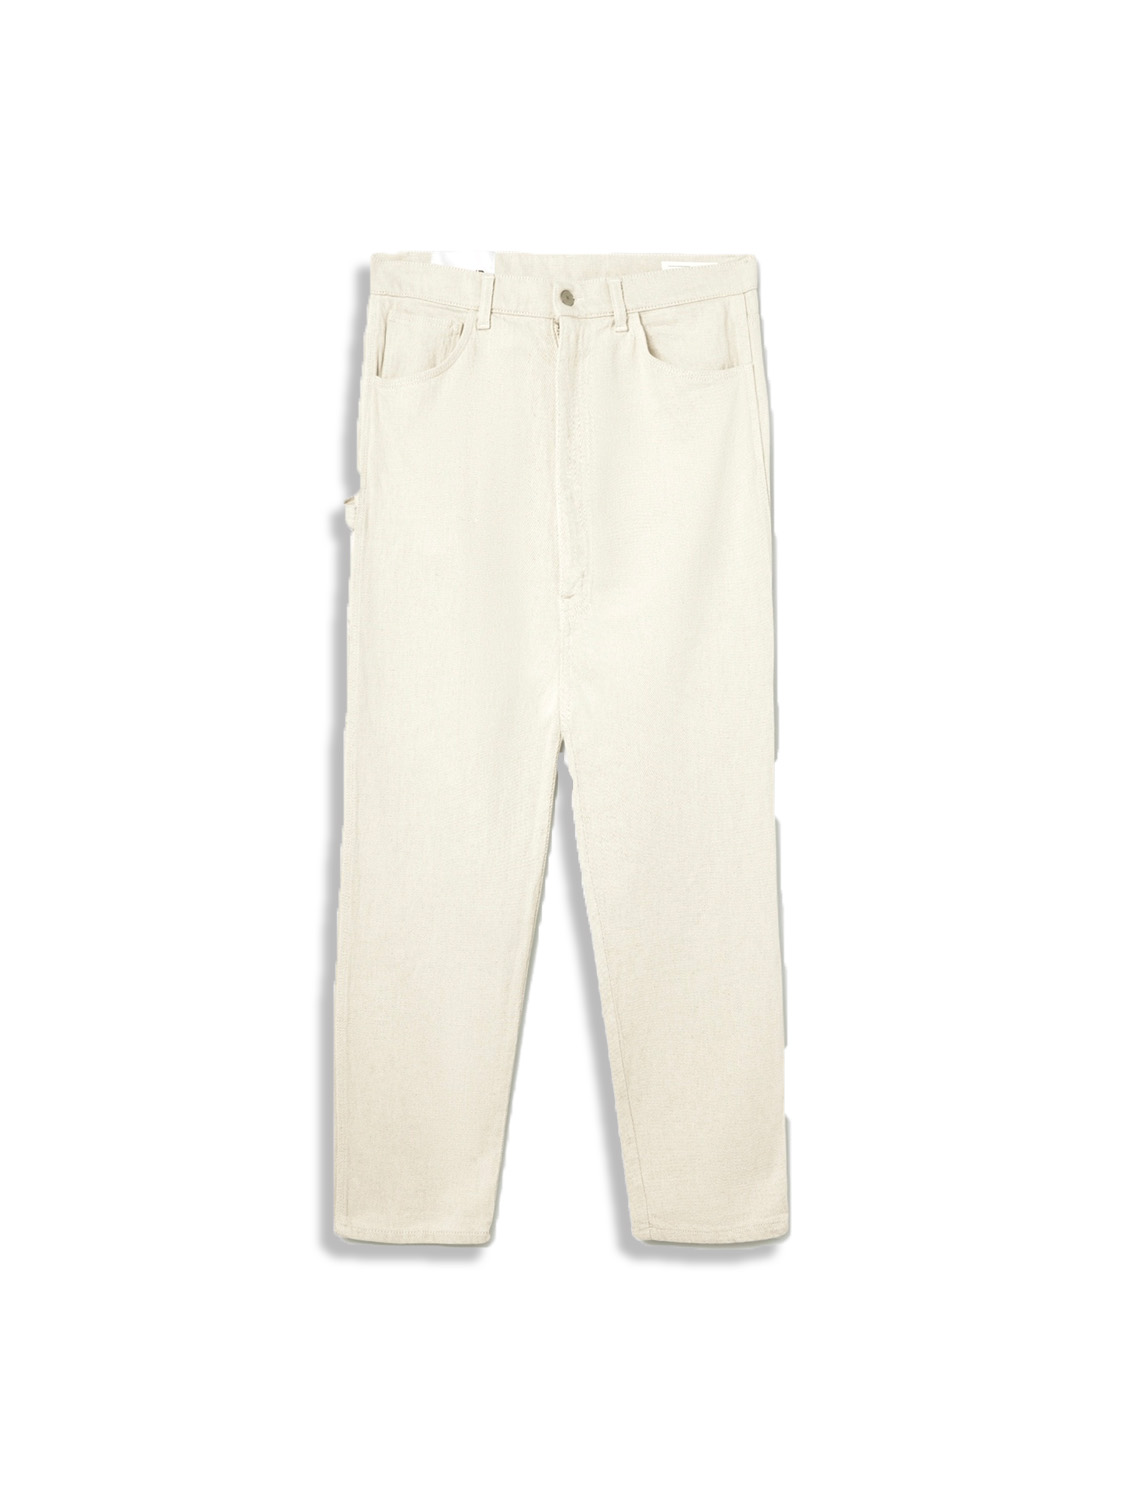 Pleated cotton trousers